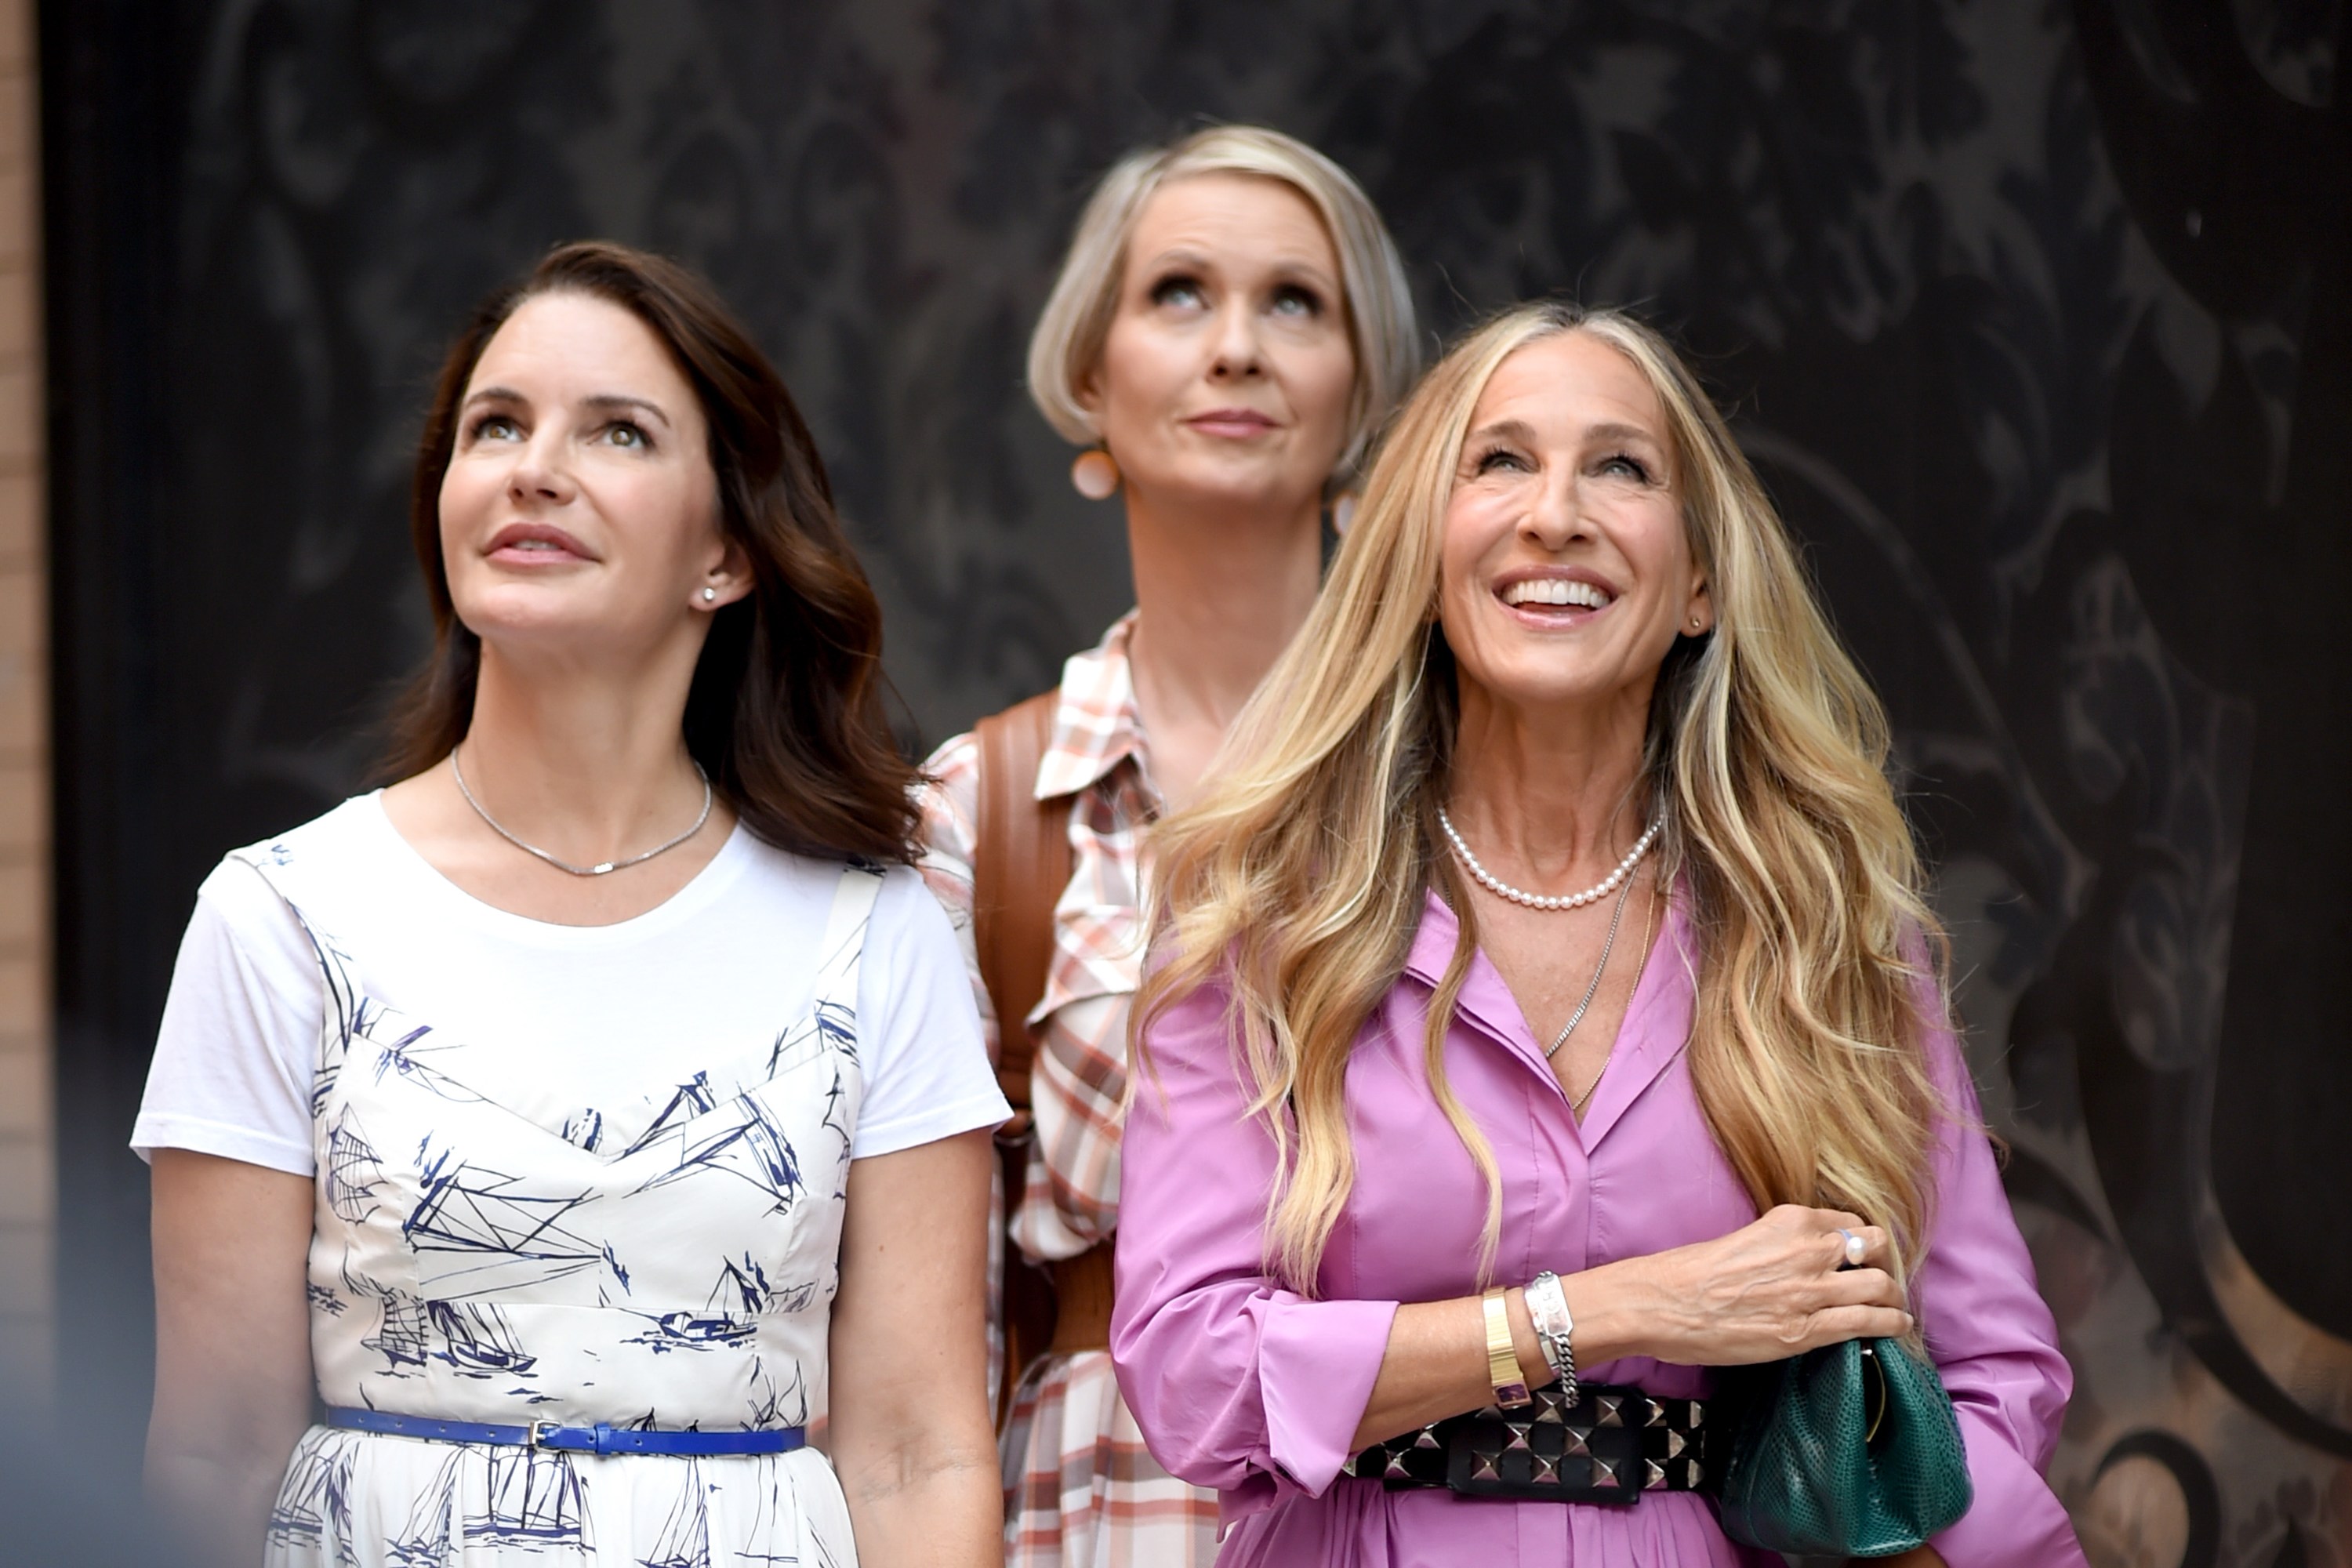 Miranda, Samantha, and Carrie walk together in the streets. They are all looking up at something out of frame and are smiling together.